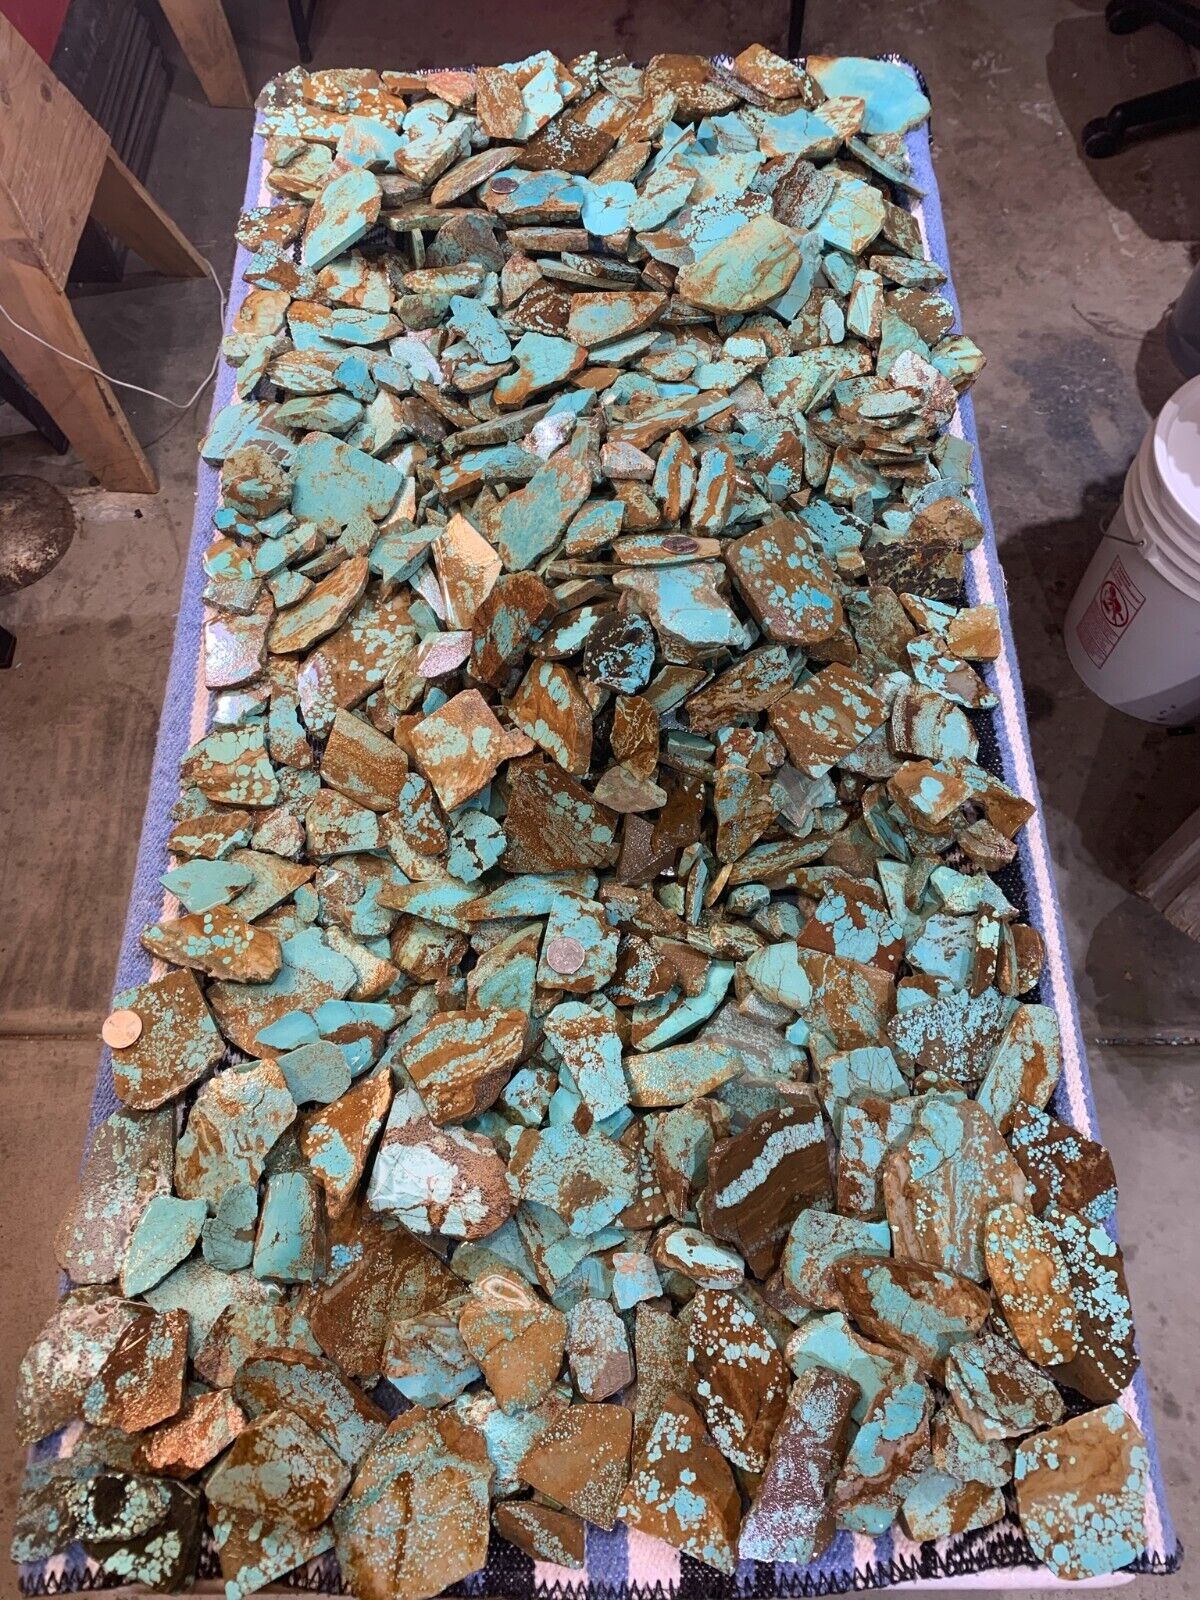 PREMIUM NV#8. Double Stabilized. Fat Turquoise Slabs No crumble 50 LB Buckets